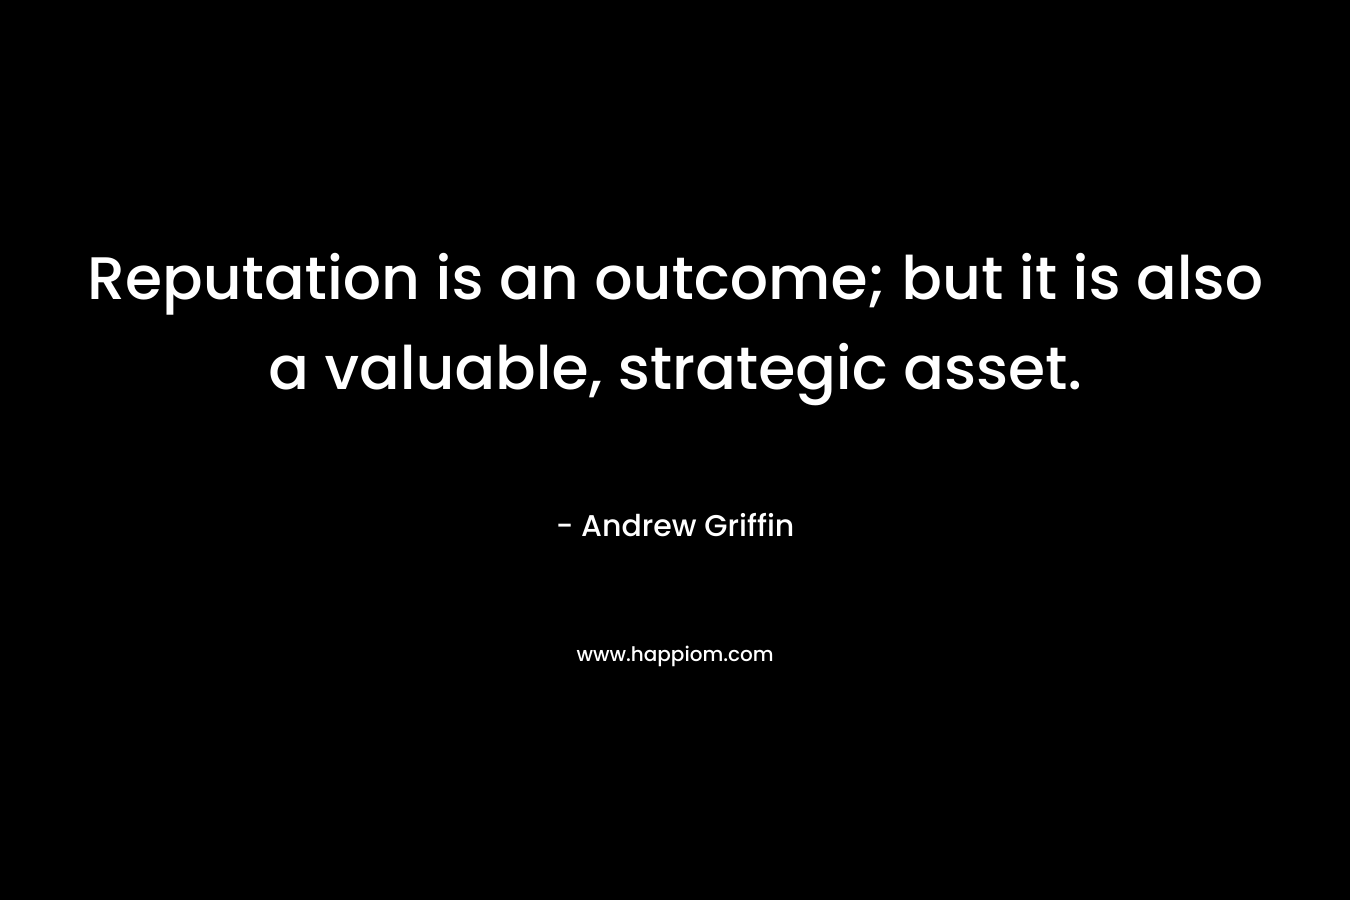 Reputation is an outcome; but it is also a valuable, strategic asset. – Andrew Griffin